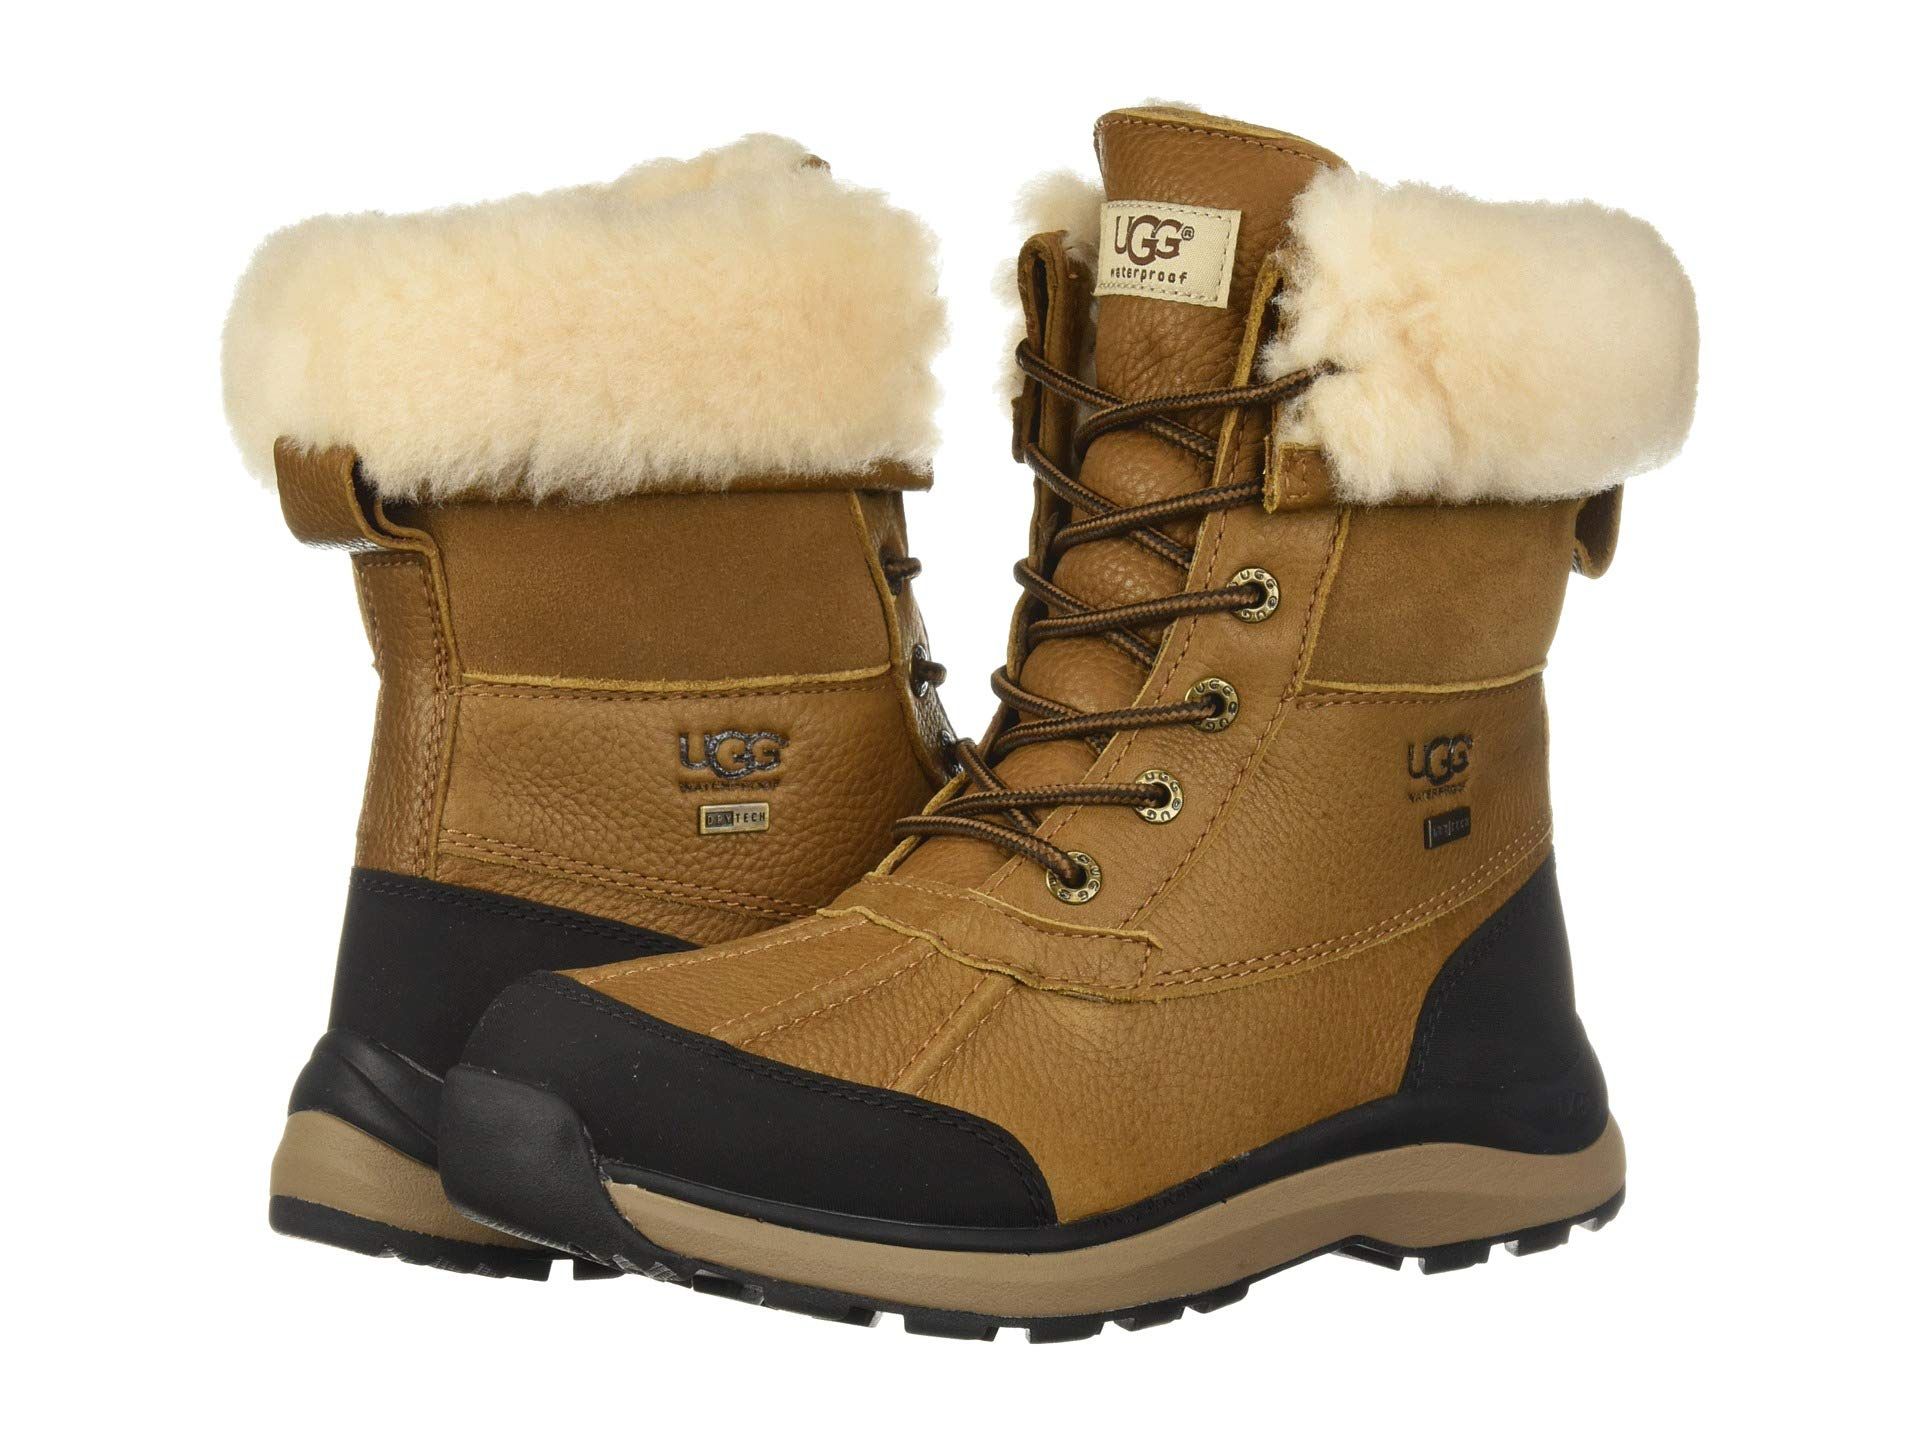 Sale > wide toe winter boots > in stock